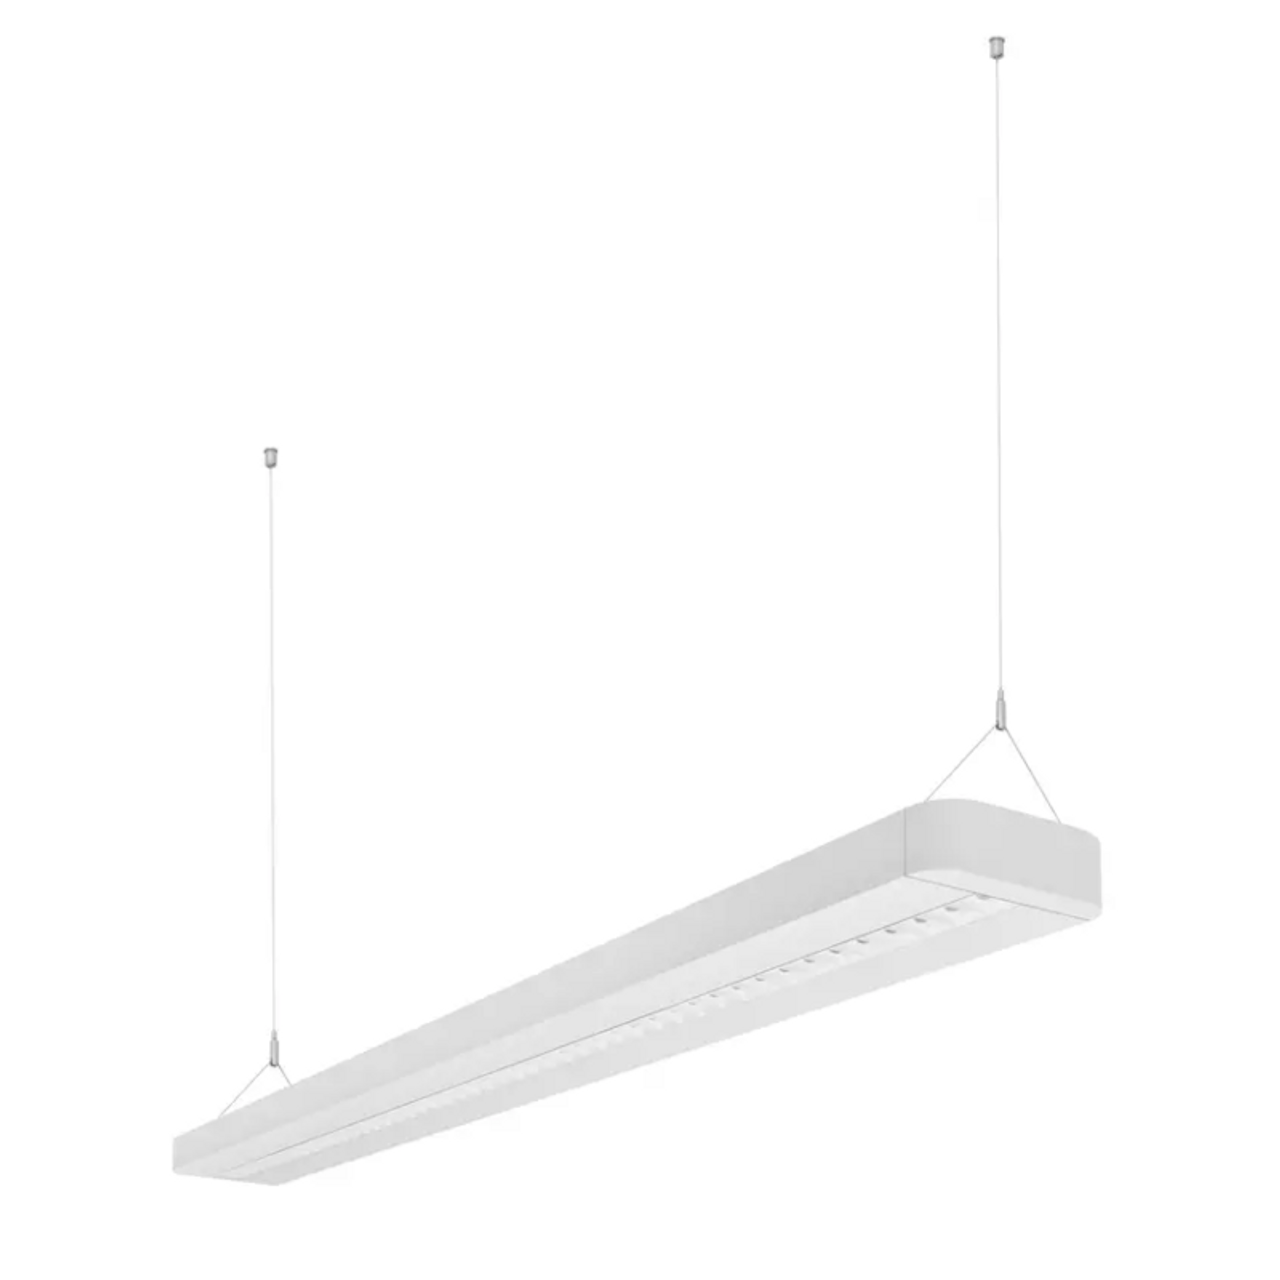 LED Linear Indiviled Direct/Indirect 1500mm 56W 6550lm 4000K White